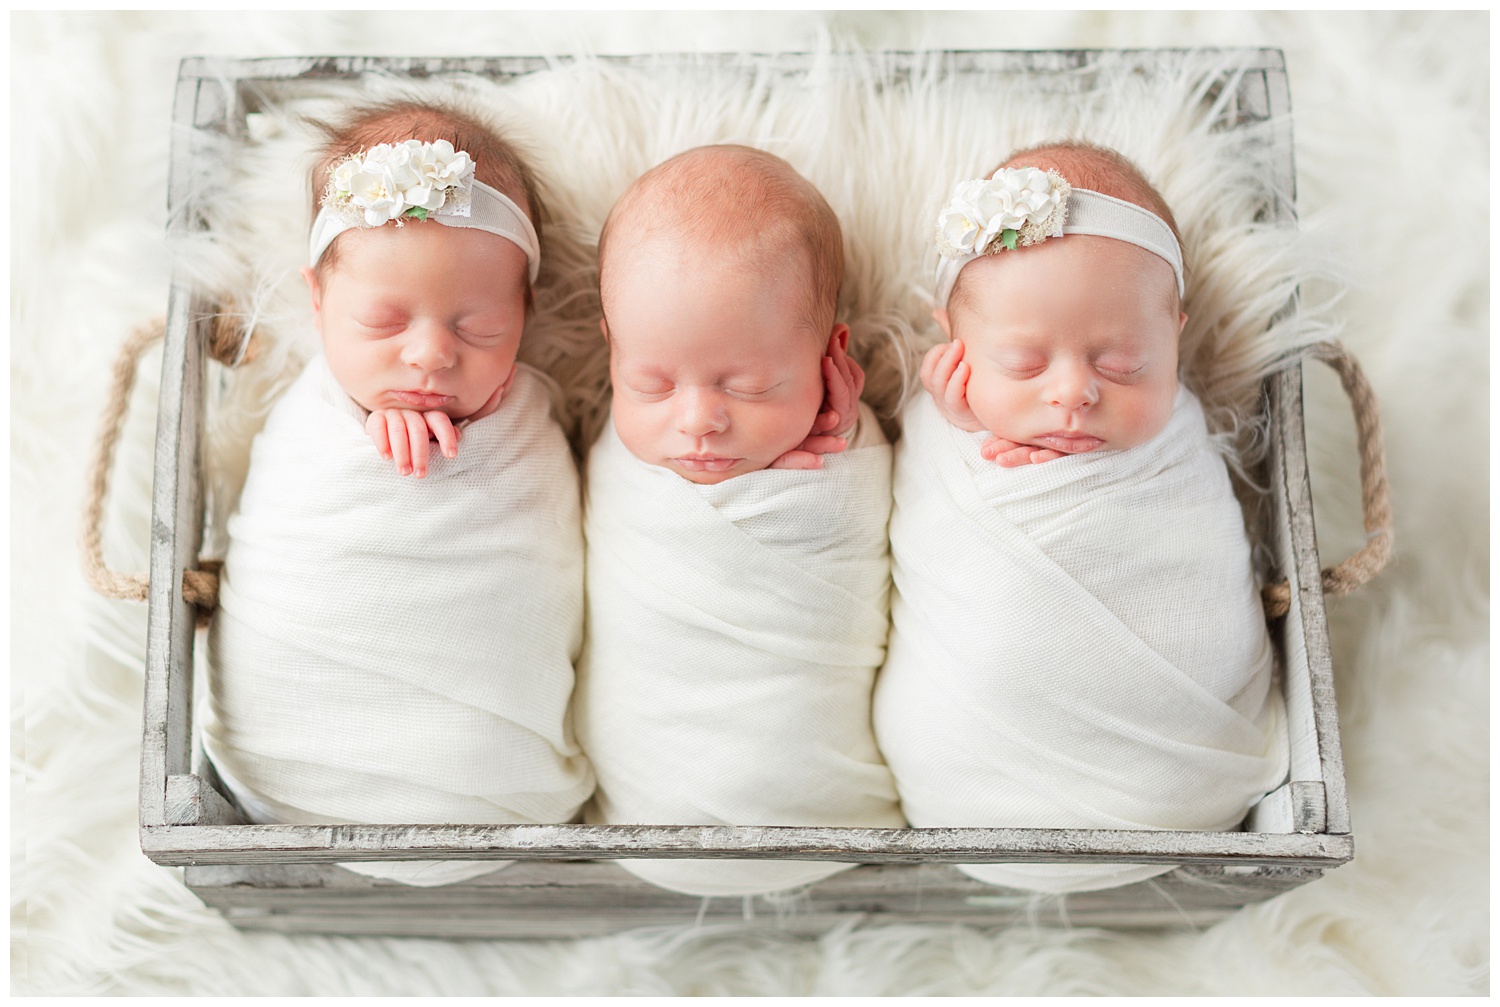 Triplet newborns Emery, Turner and Lydia snuggled together, wrapped up in cream and nestled in a wood box | CB Studio